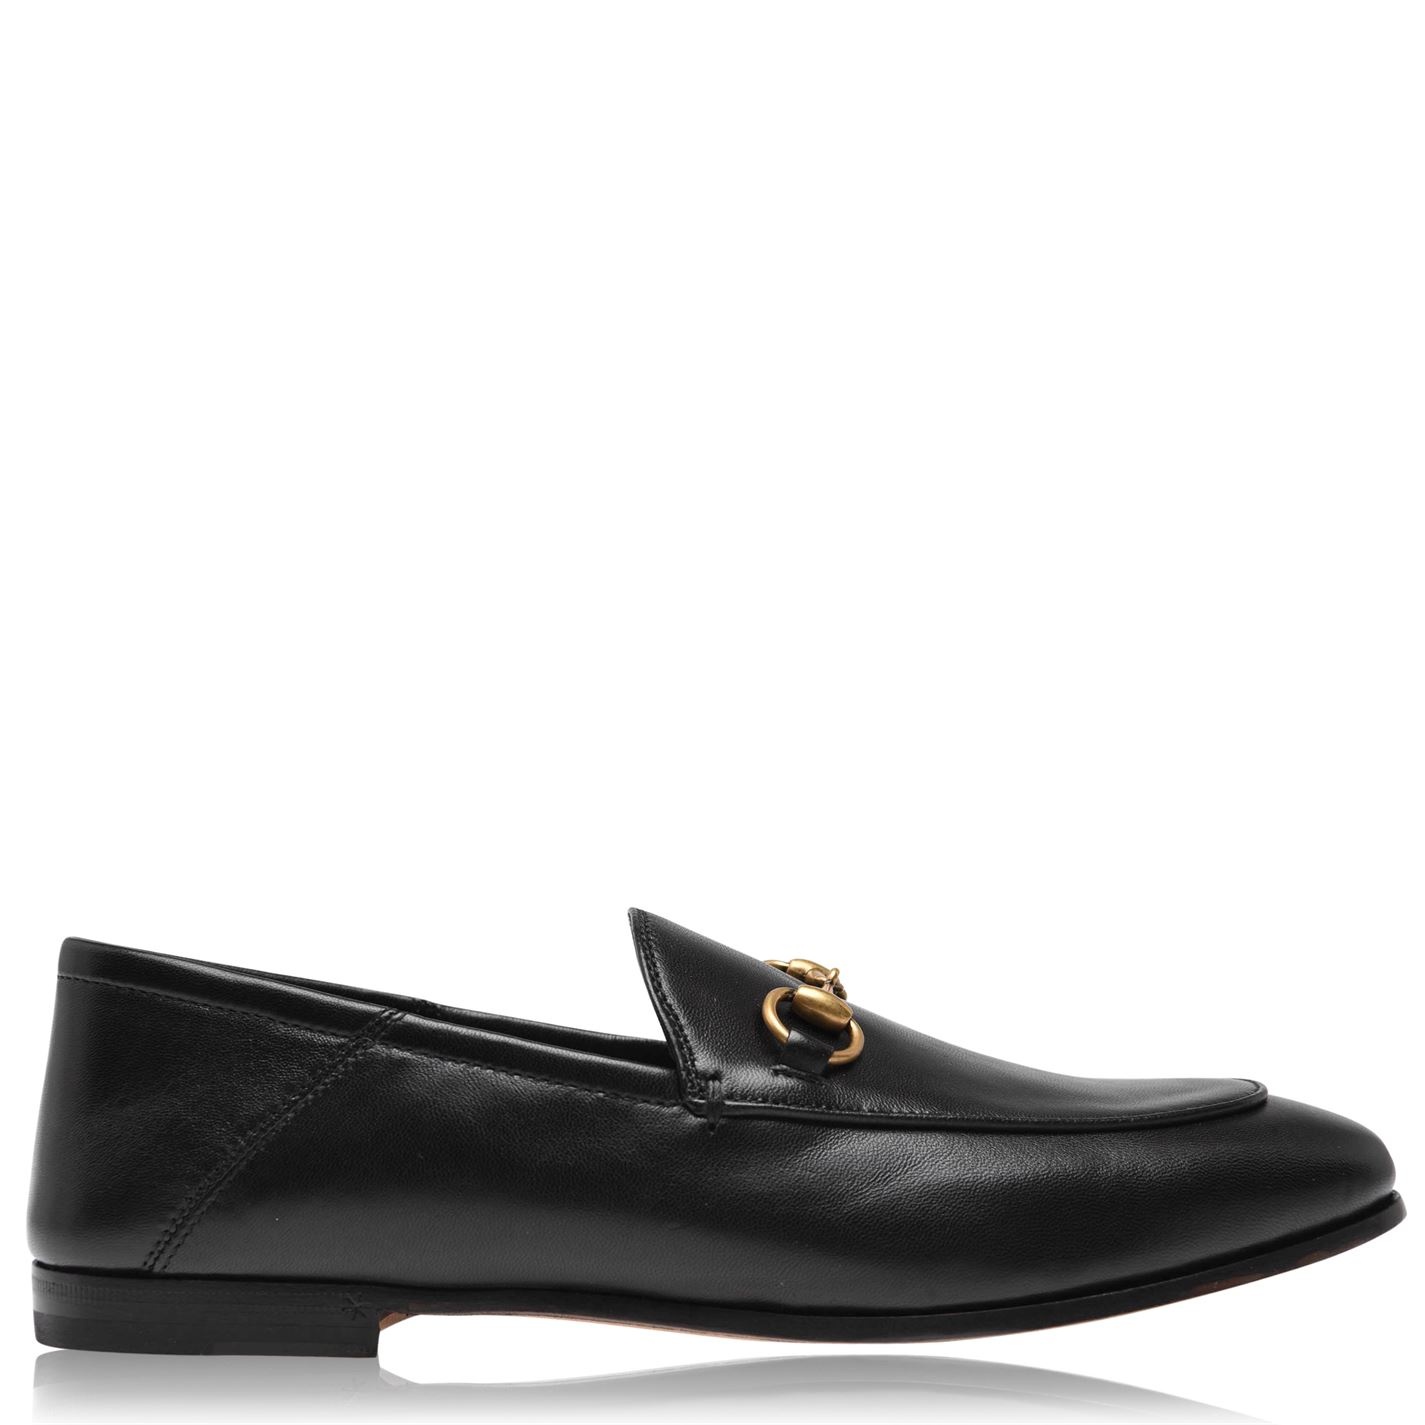 BRIXTON LOAFERS - 1